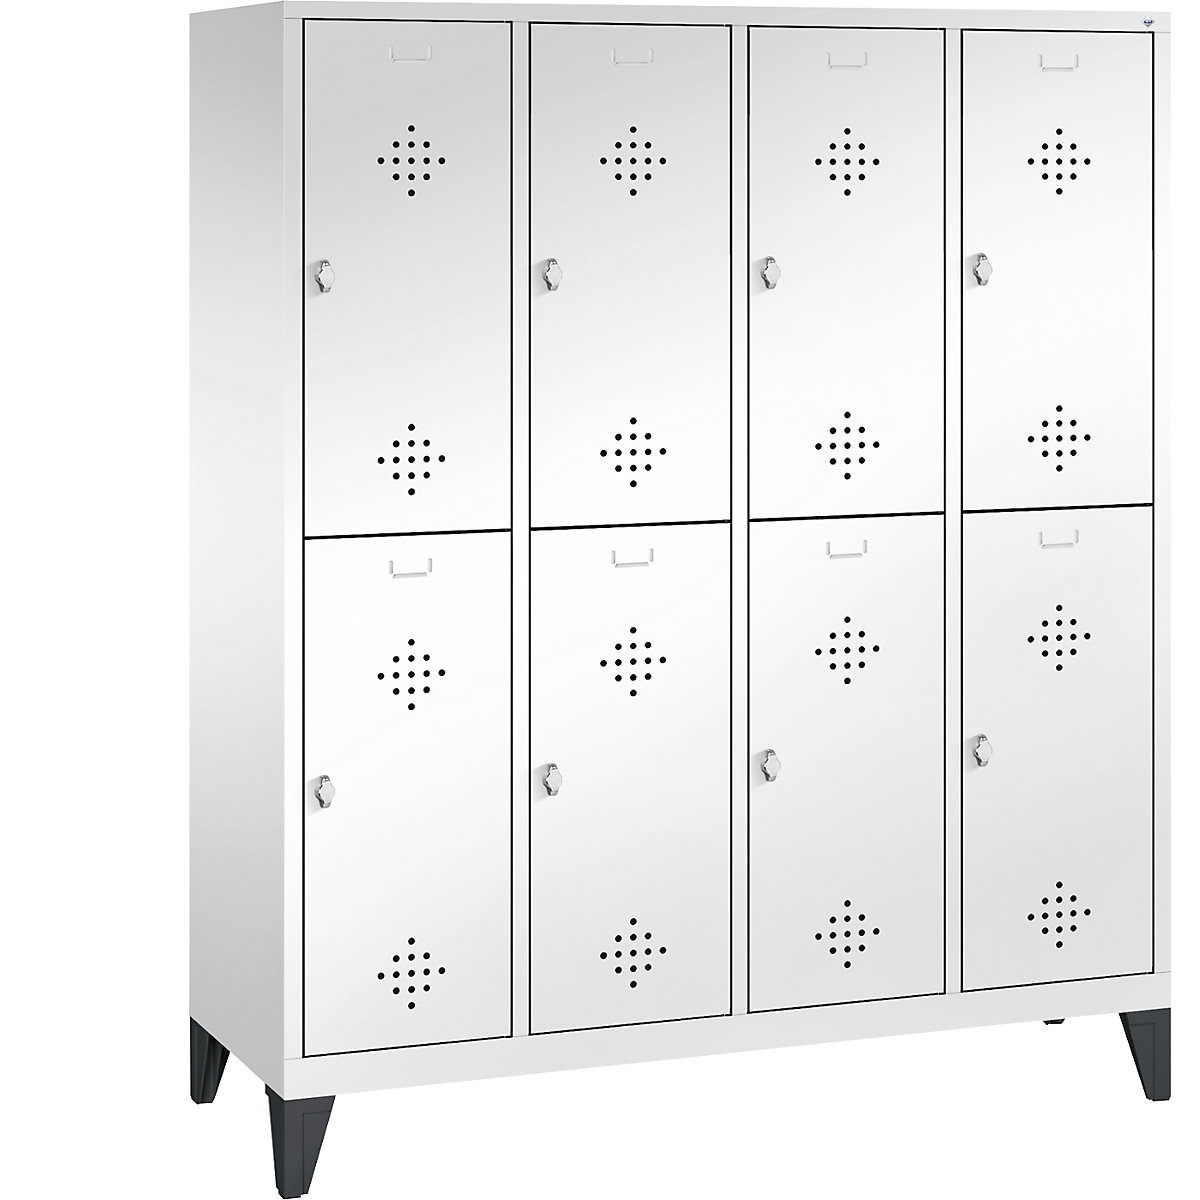 CLASSIC cloakroom locker with feet, double tier – C+P, 4 compartments, 2 shelf compartments each, compartment width 400 mm, traffic white-8